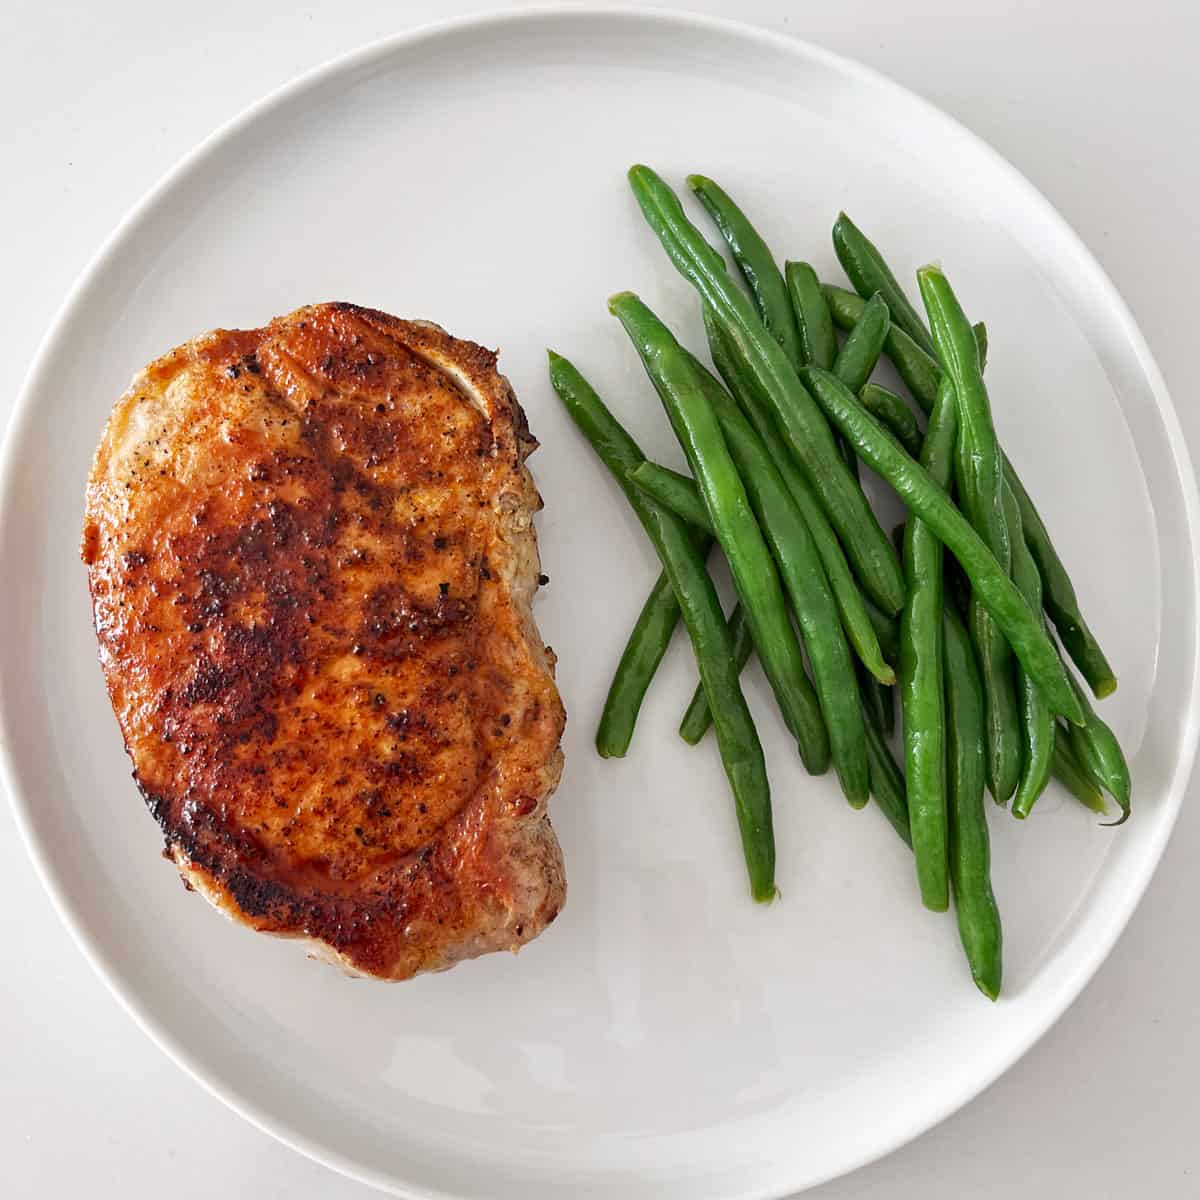 A pork chop served with green beans.